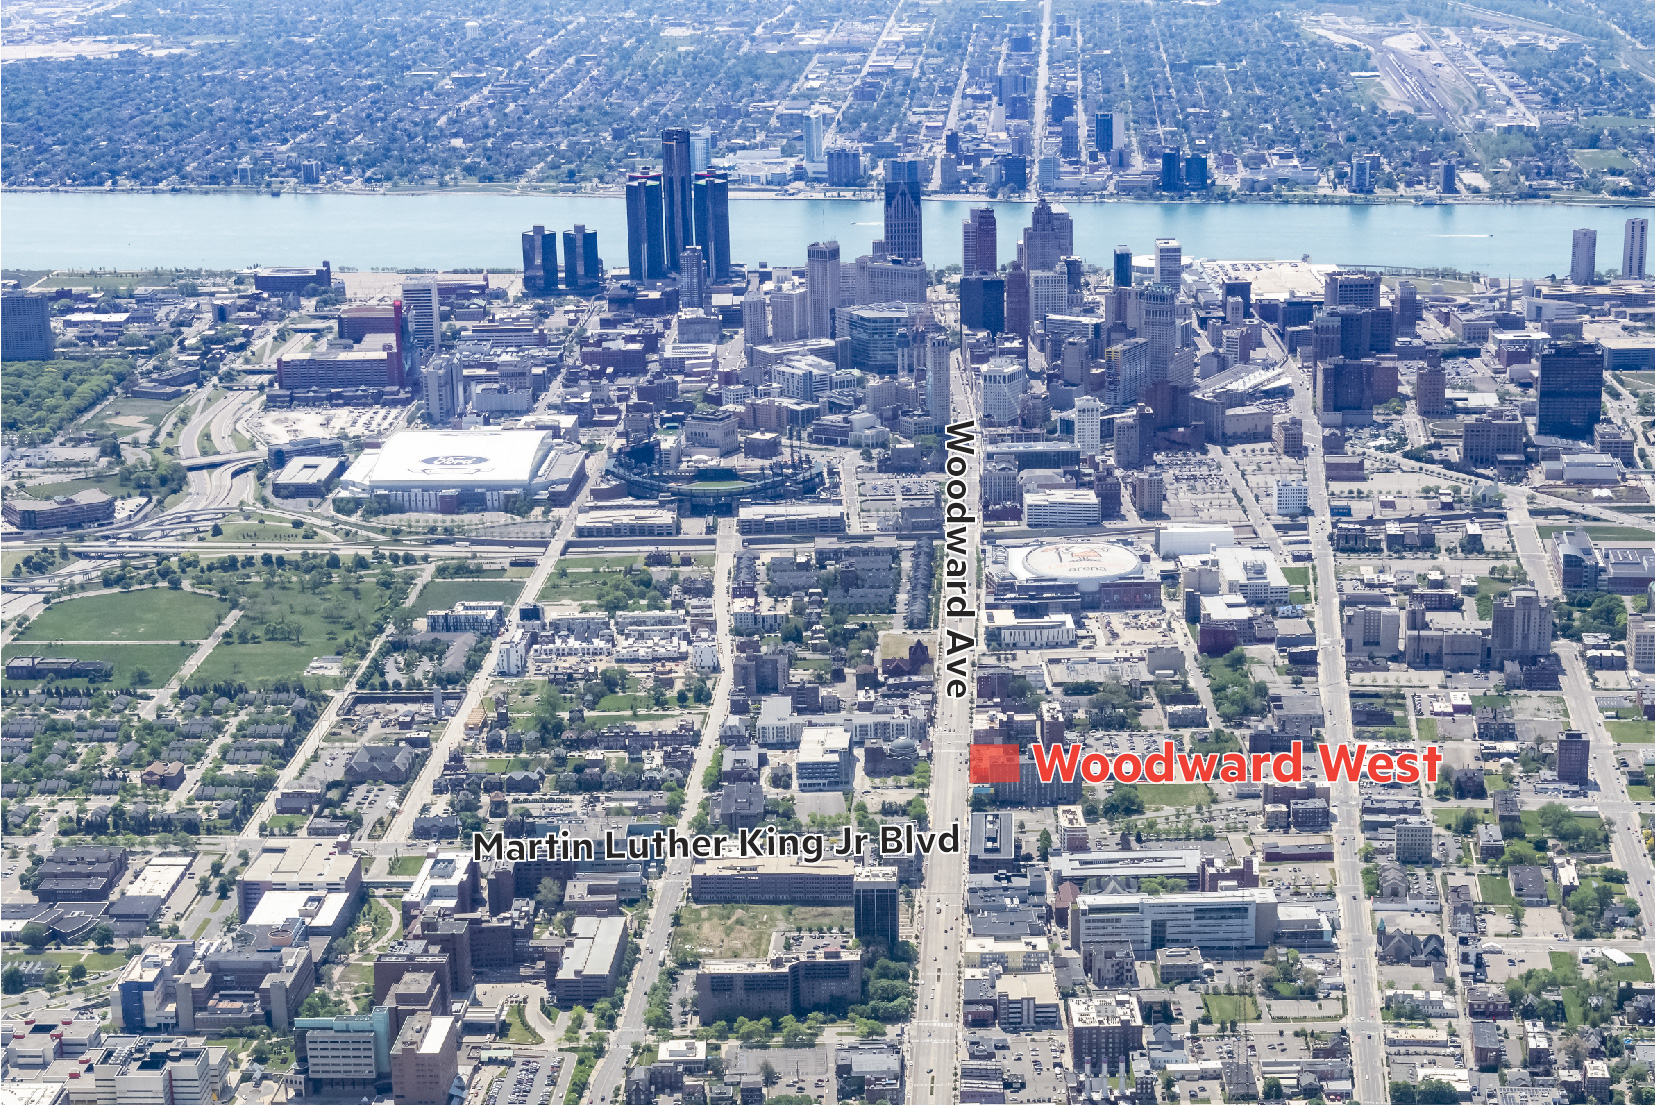 Aerial photo of site in relation to downtown Detroit